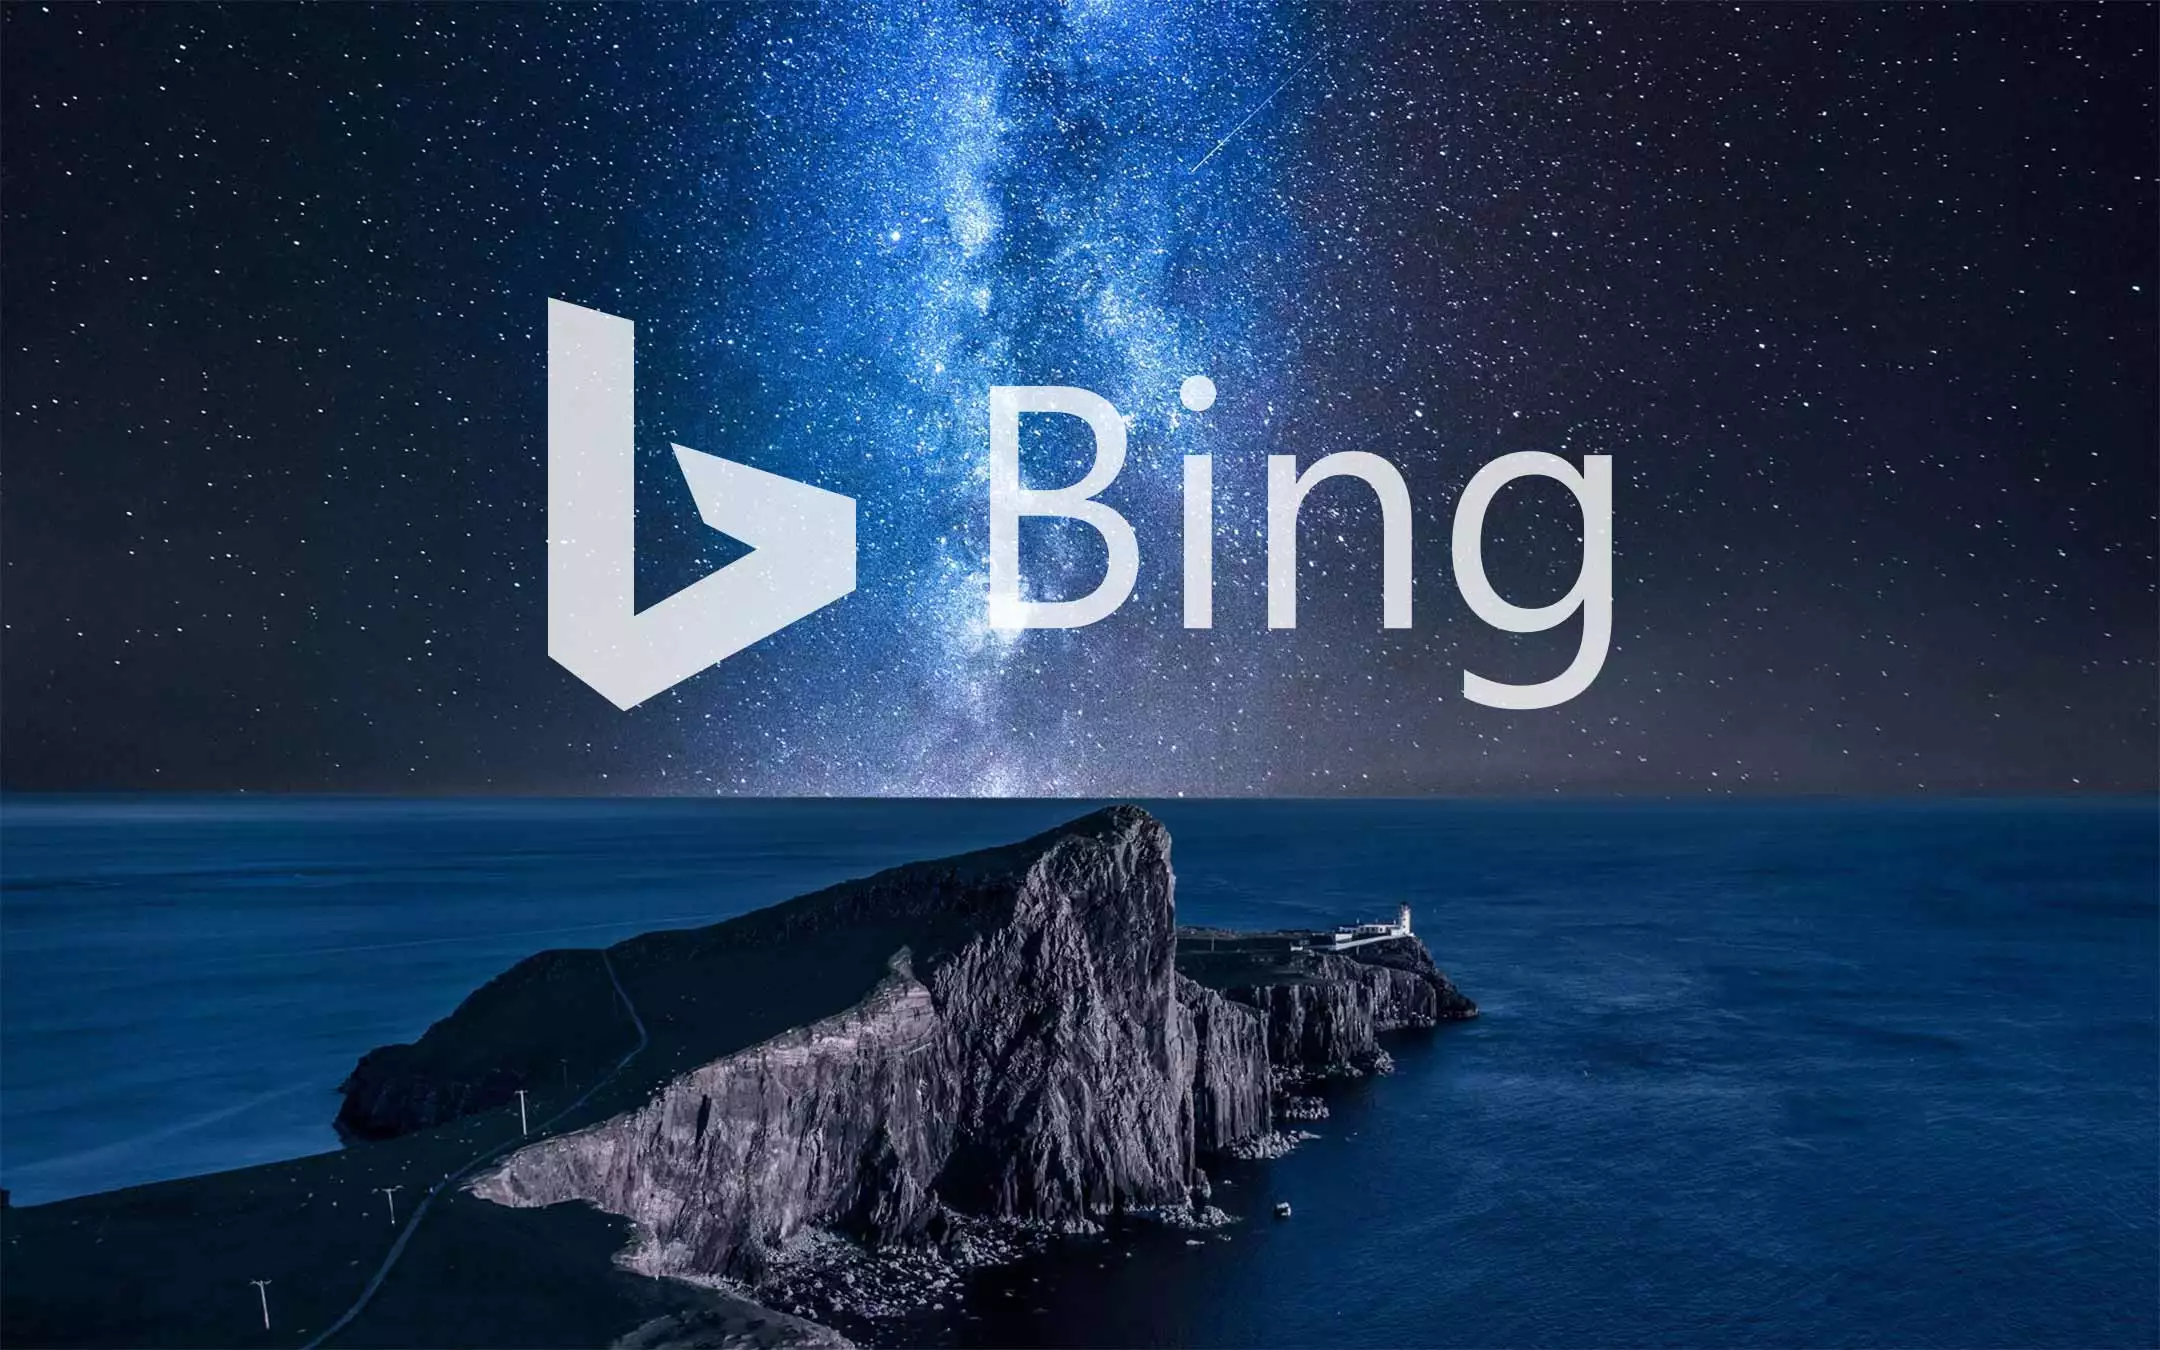 Find Windows 10 PC background images every day with Bing Wallpaper | PCWorld